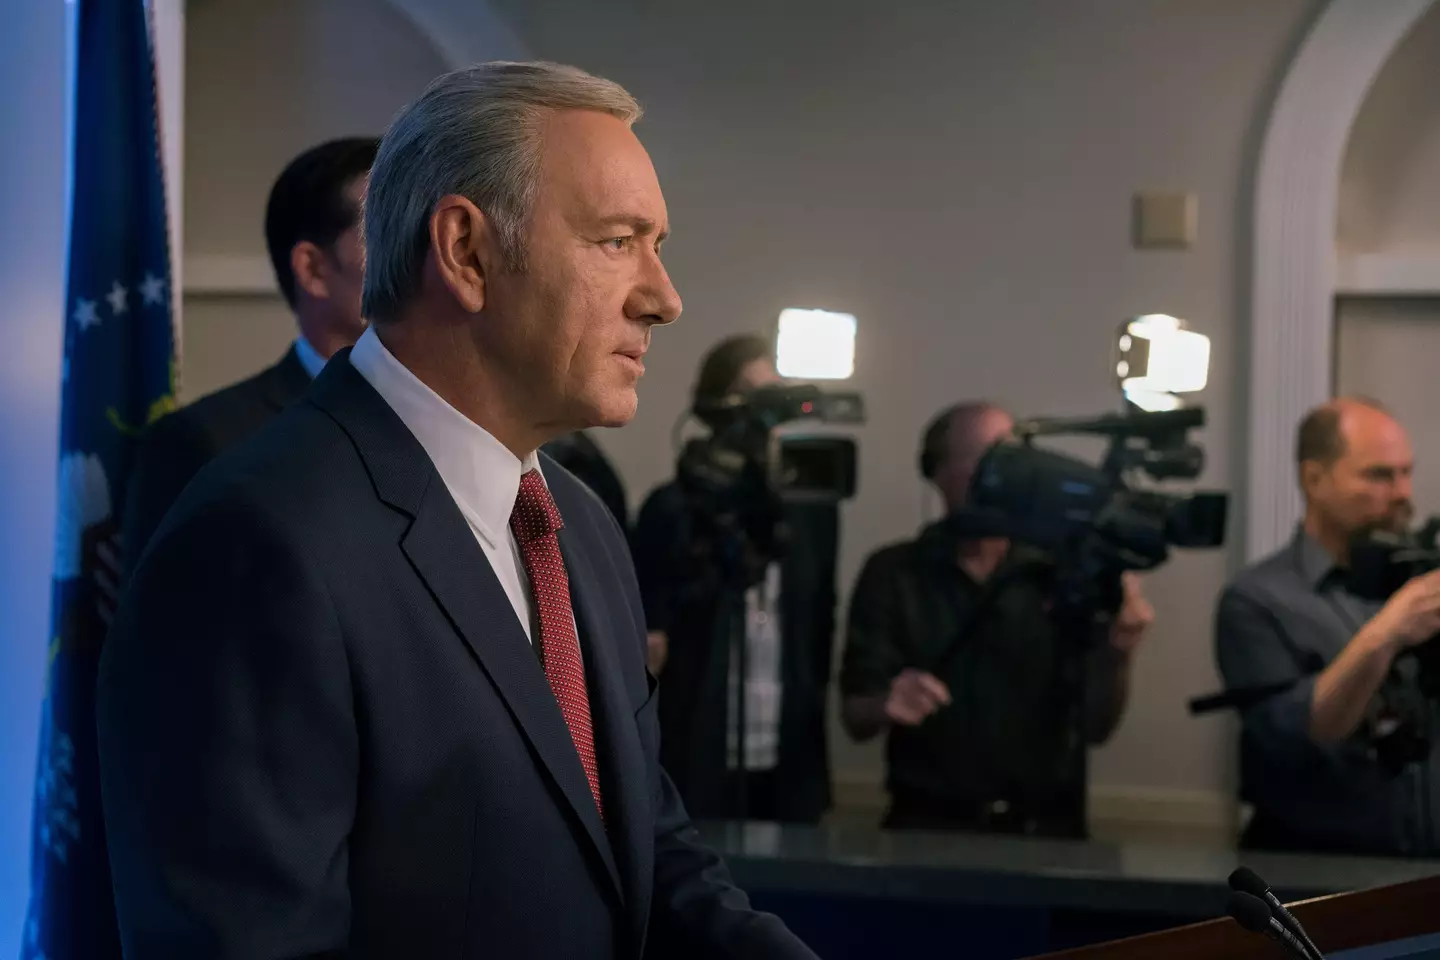 Kevin Spacey was fired from House of Cards and ordered to pay almost $31 million.